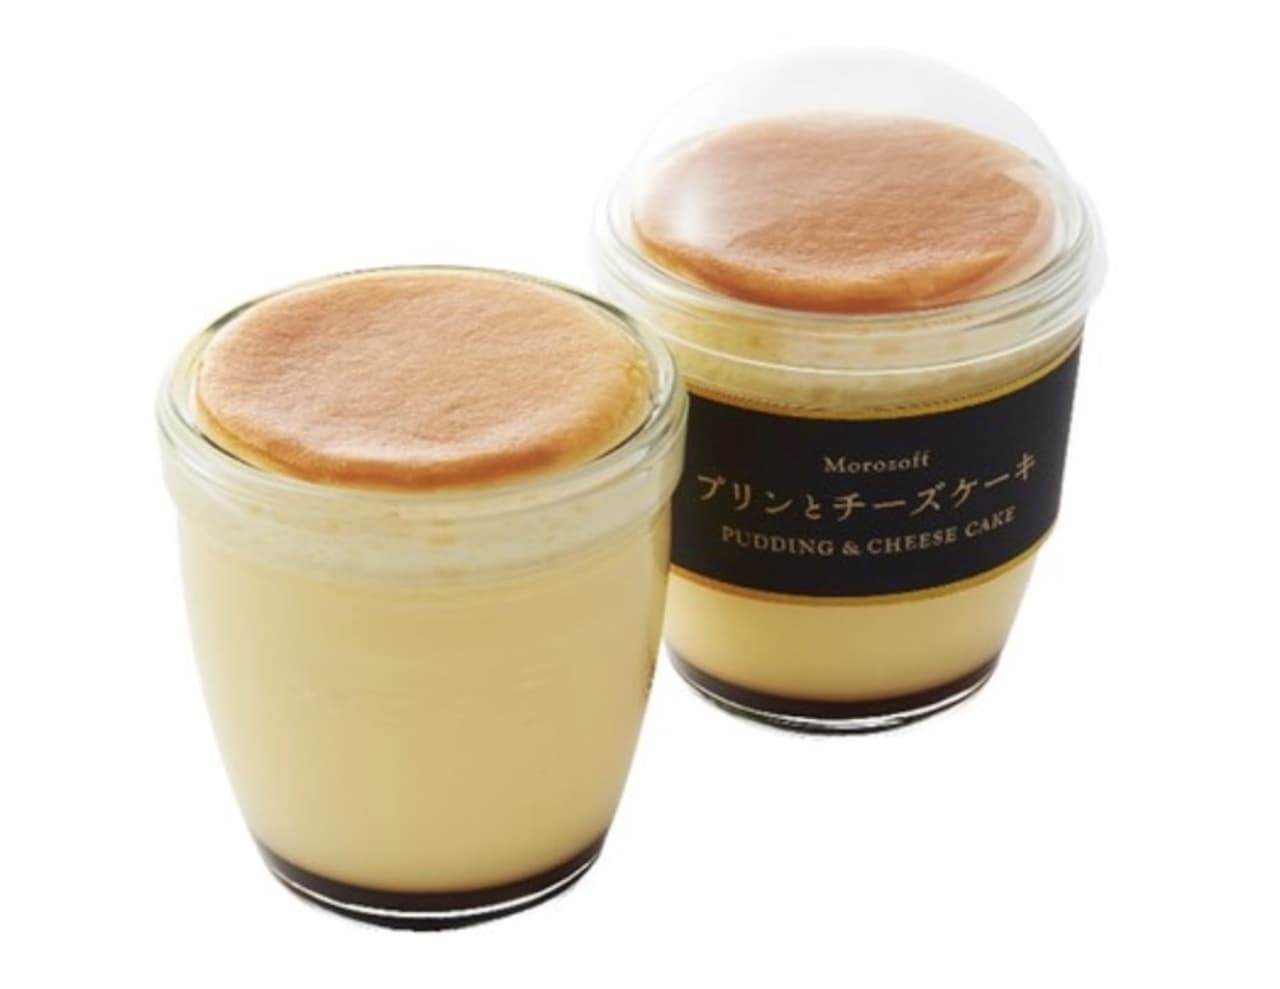 "Pudding and cheesecake" first appeared in Daimaru Tokyo